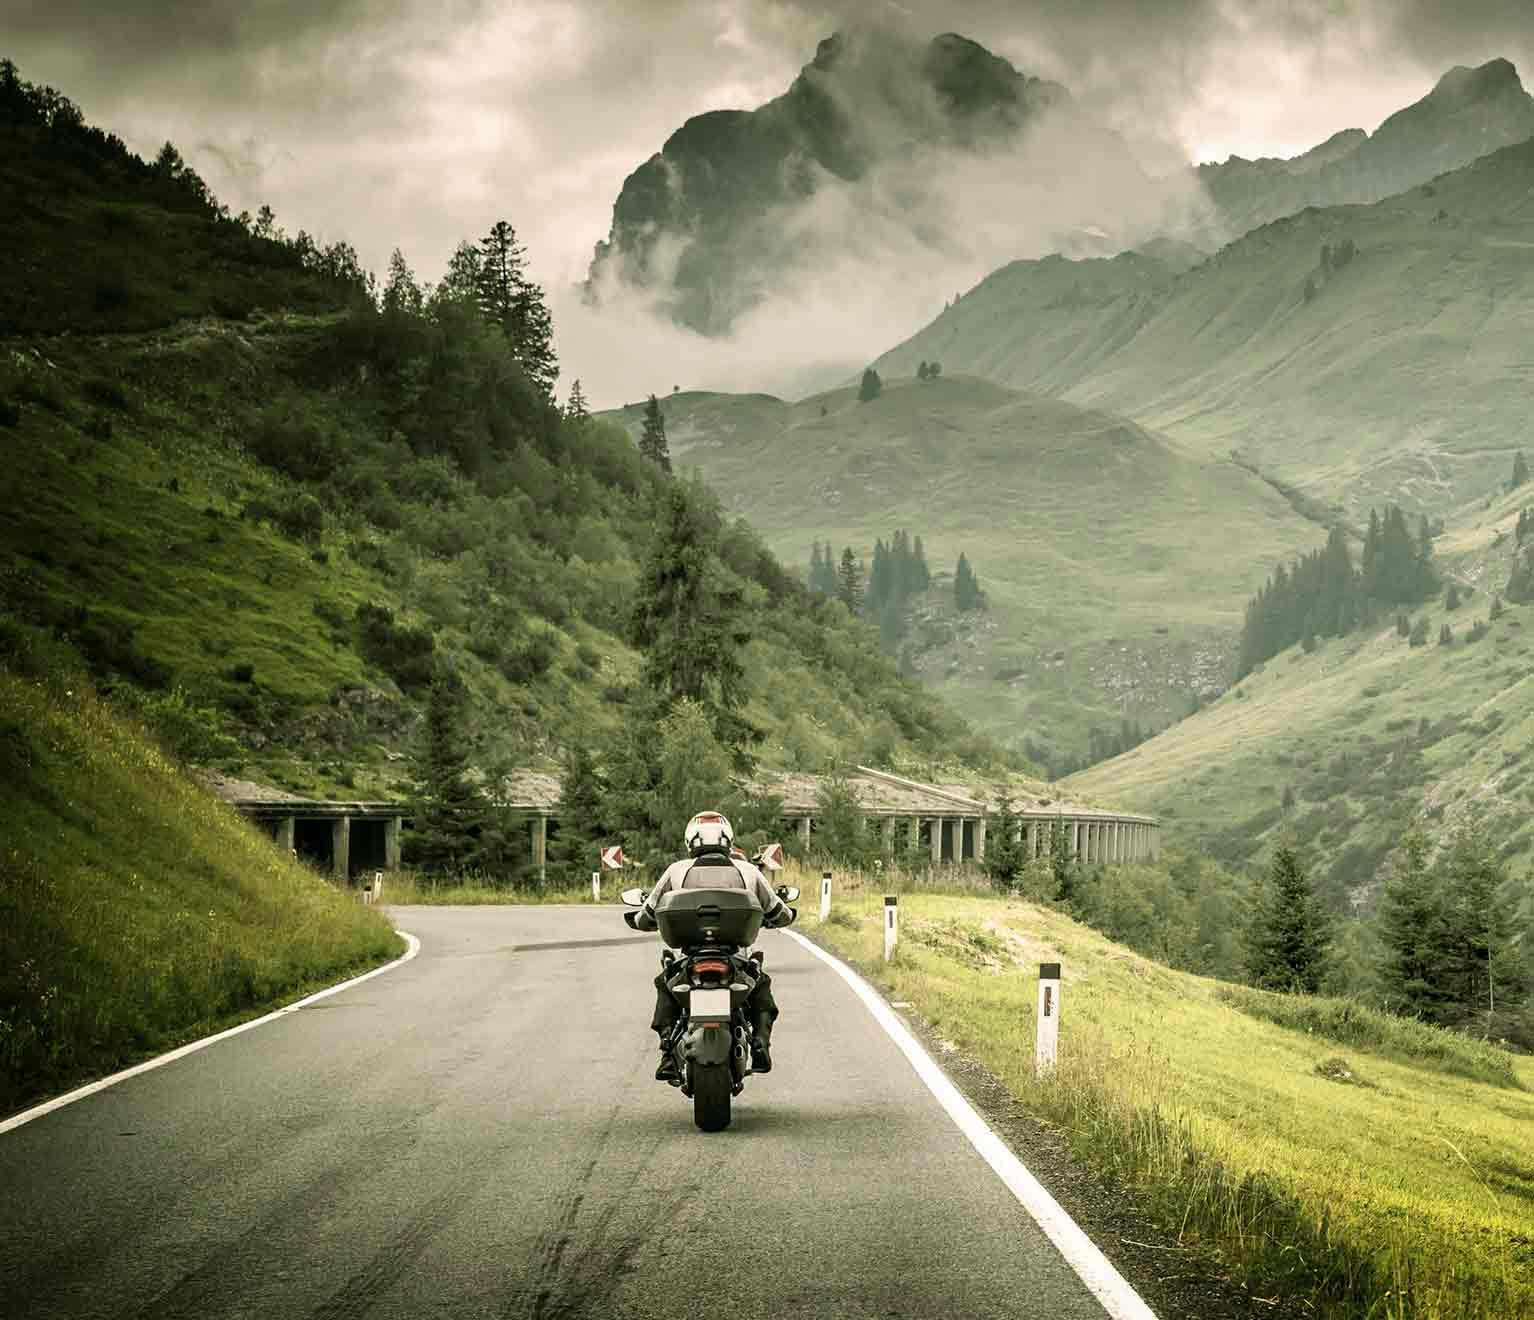 a person riding a motorcycle on a road in the mountains